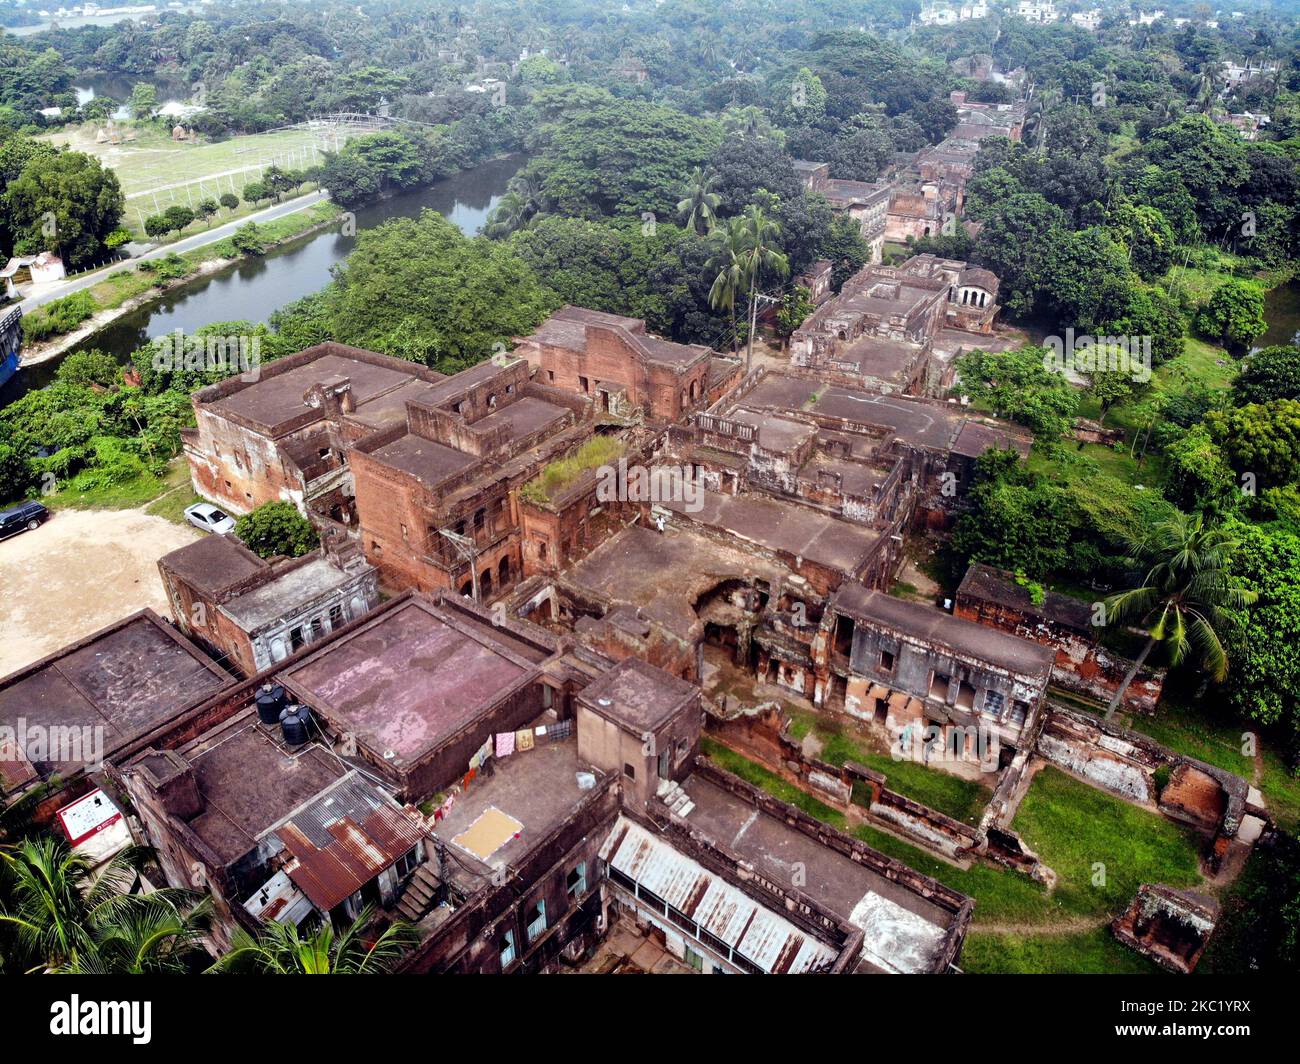 View of ancient building in Panam City, Bangladesh, on October 16, 2020. Panam Nagar, it was the most attractive historical city in Bangladesh. Visitors take time-off from the hustle and bustle from the urban busy life, but enjoy walking through the lane of the ancient city adorned with dilapidated, vandalised and illegally occupied derelict red brick buildings in Panam Nagar.Panam Nagar, lies 30 miles southeast of the capital Dhaka at Sonargaon. The rich Hindu traders laid the foundation of Panam Nagar, is standing on the both sides of a road that stretches from east to south and measures 600 Stock Photo